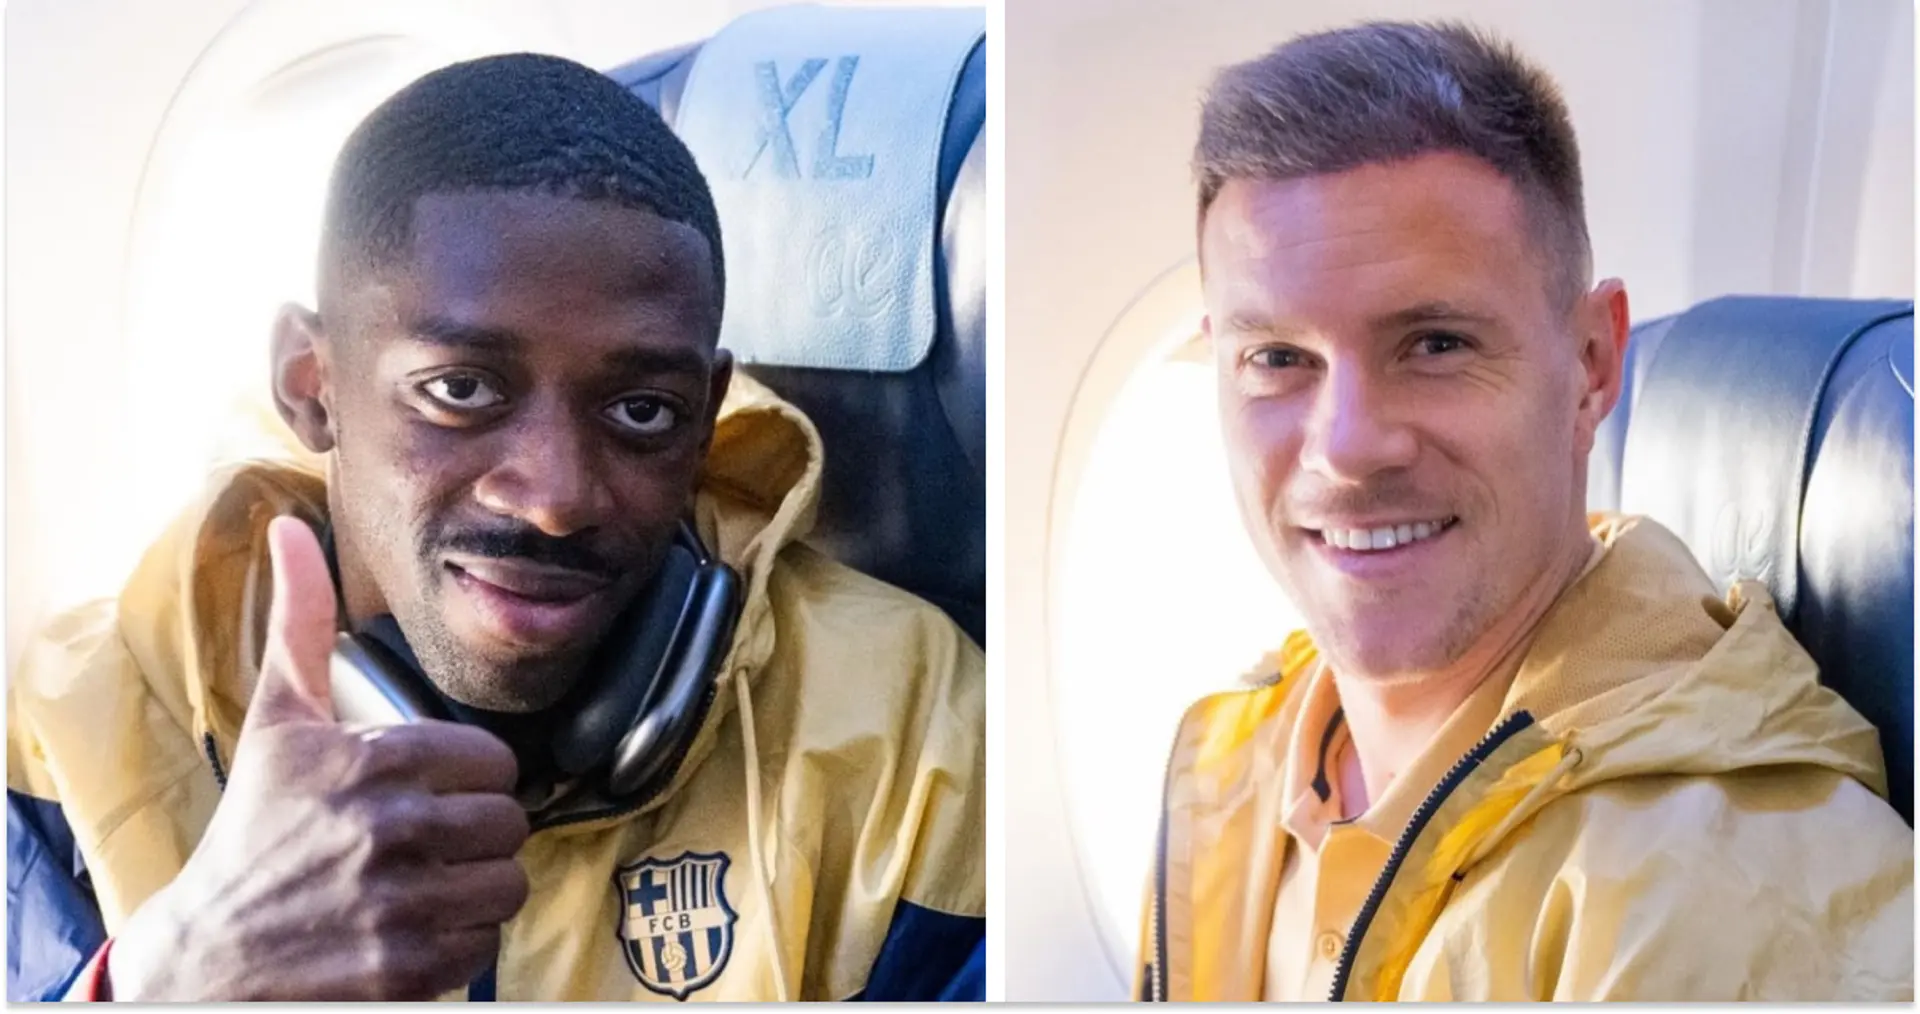 Barca players all smiles as they travel to Valencia to claim 3 important points